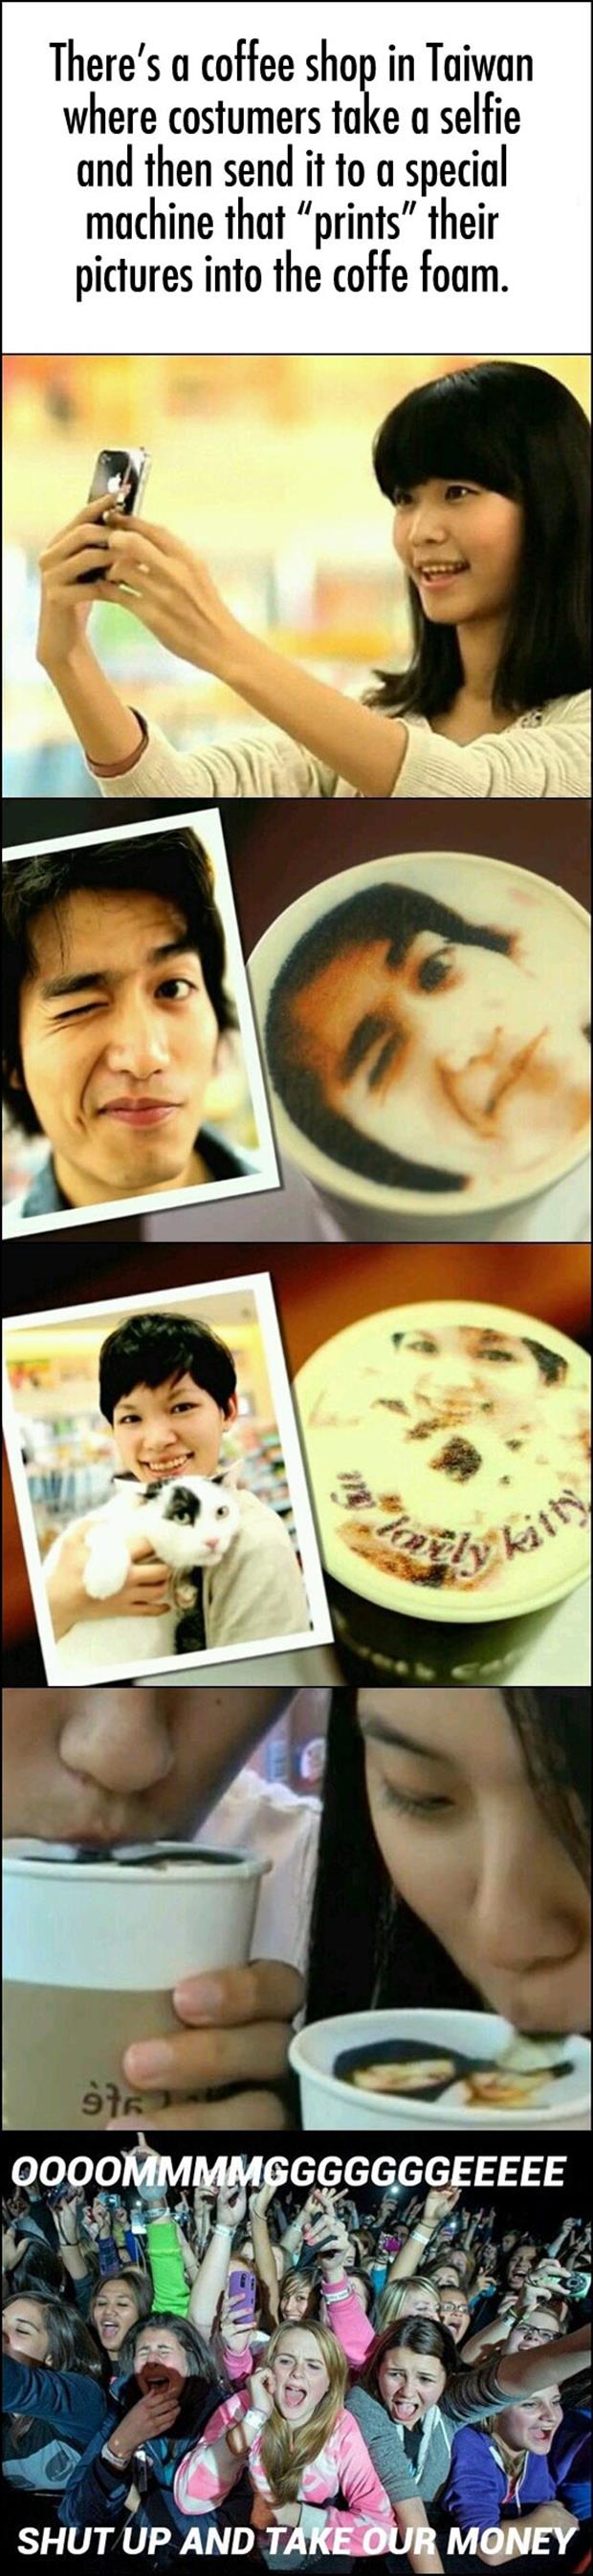 dish - There's a coffee shop in Taiwan where costumers take a selfie and then send it to a special machine that "prints" their pictures into the coffe foam. 9762 Oooommmmgggggggeeeee Shut Up And Take Our Money